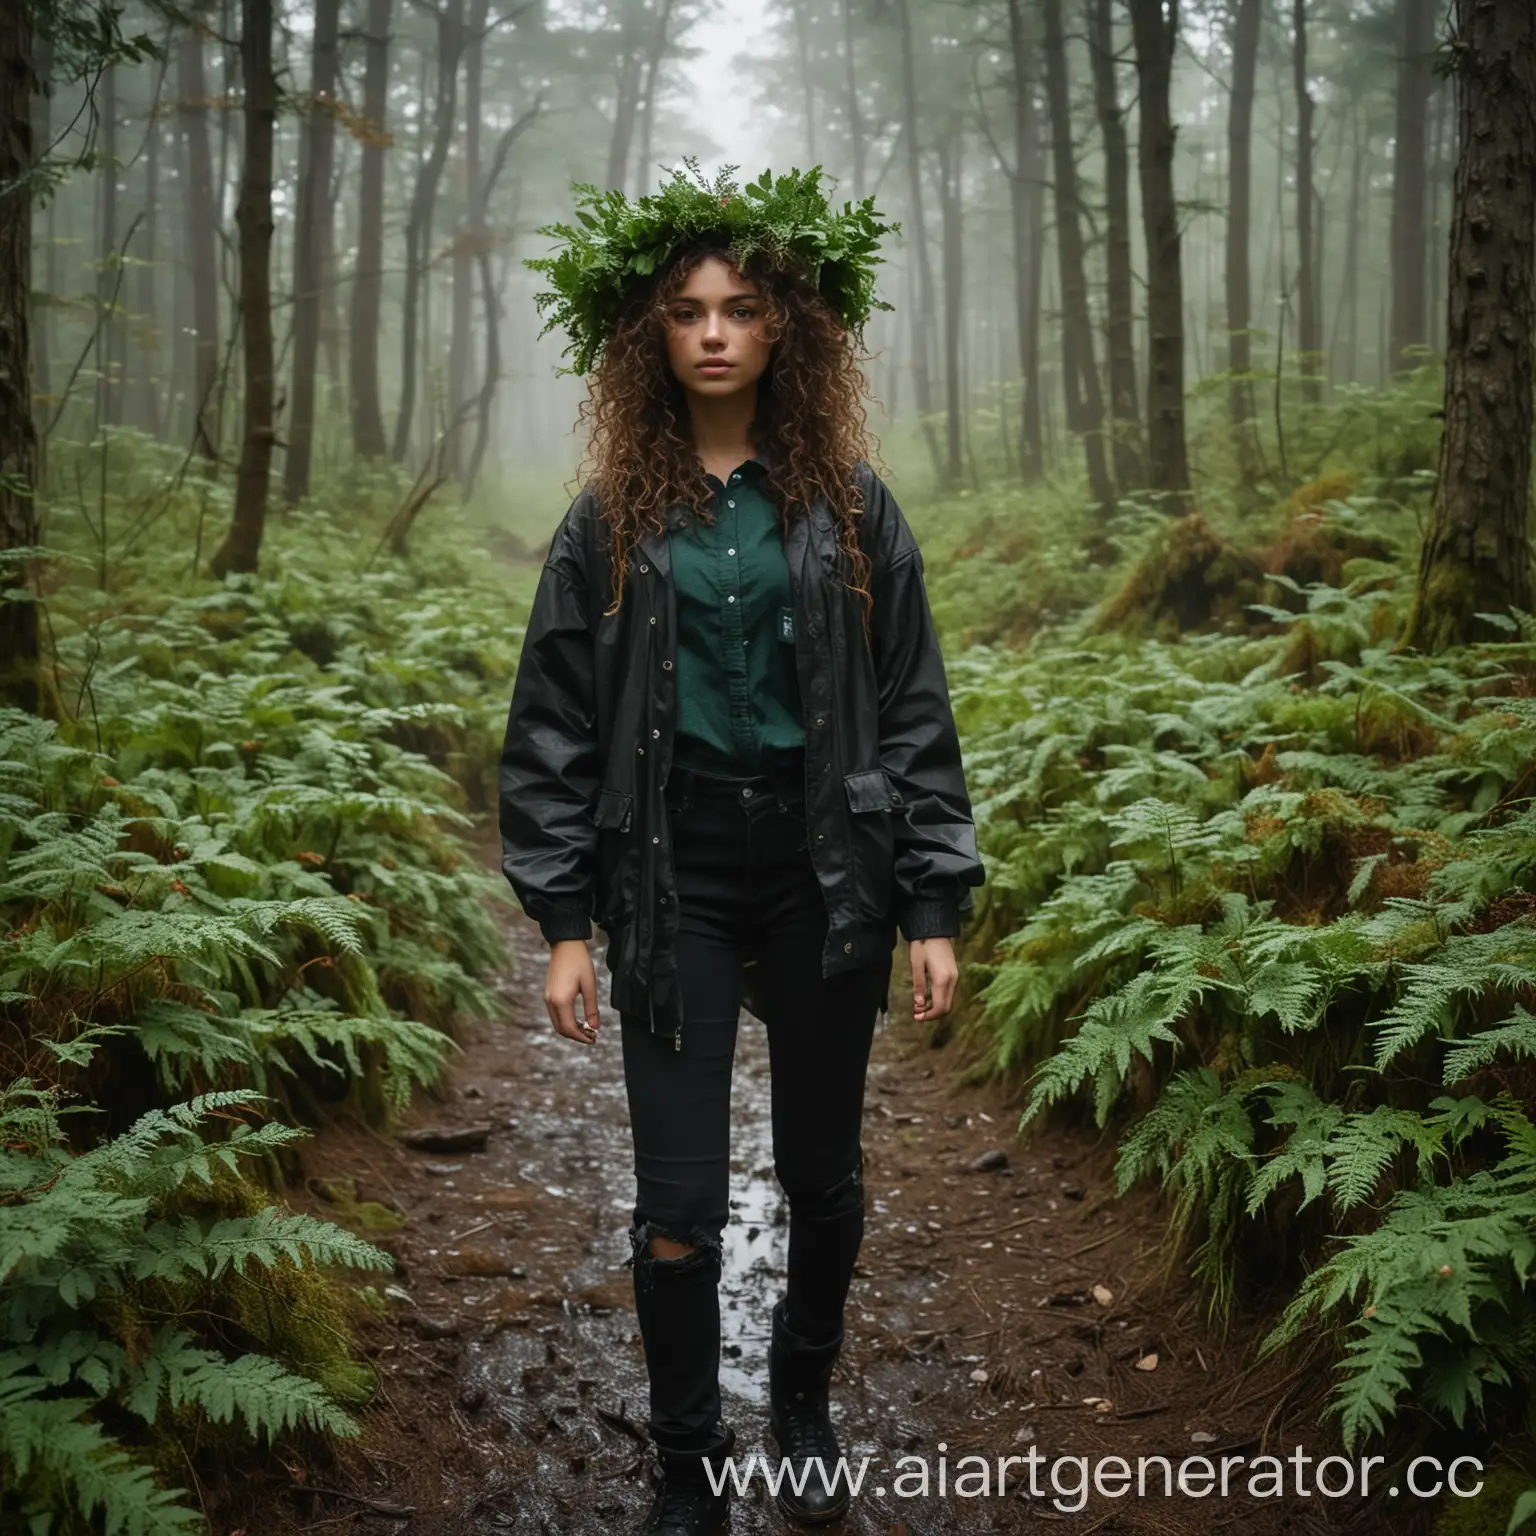 Young-Wanderer-in-Enchanted-Forest-Among-Tall-Trees-and-Mist